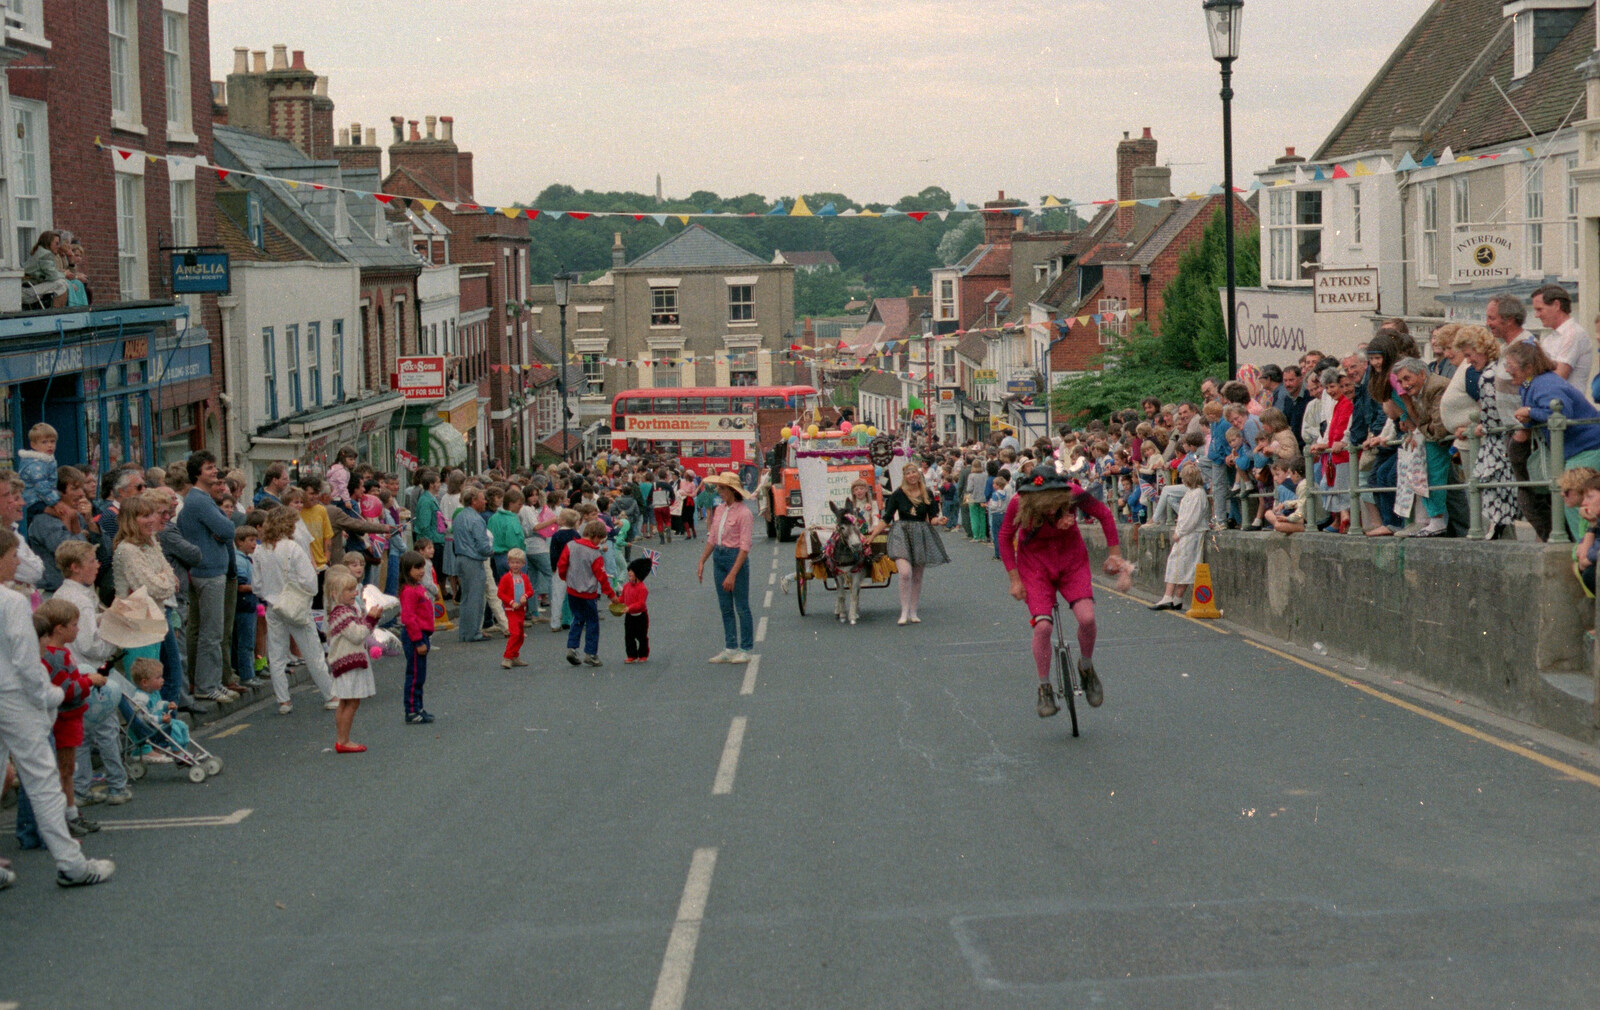 Scene on the High Street from The Lymington Carnival, Hampshire - 17th June 1985